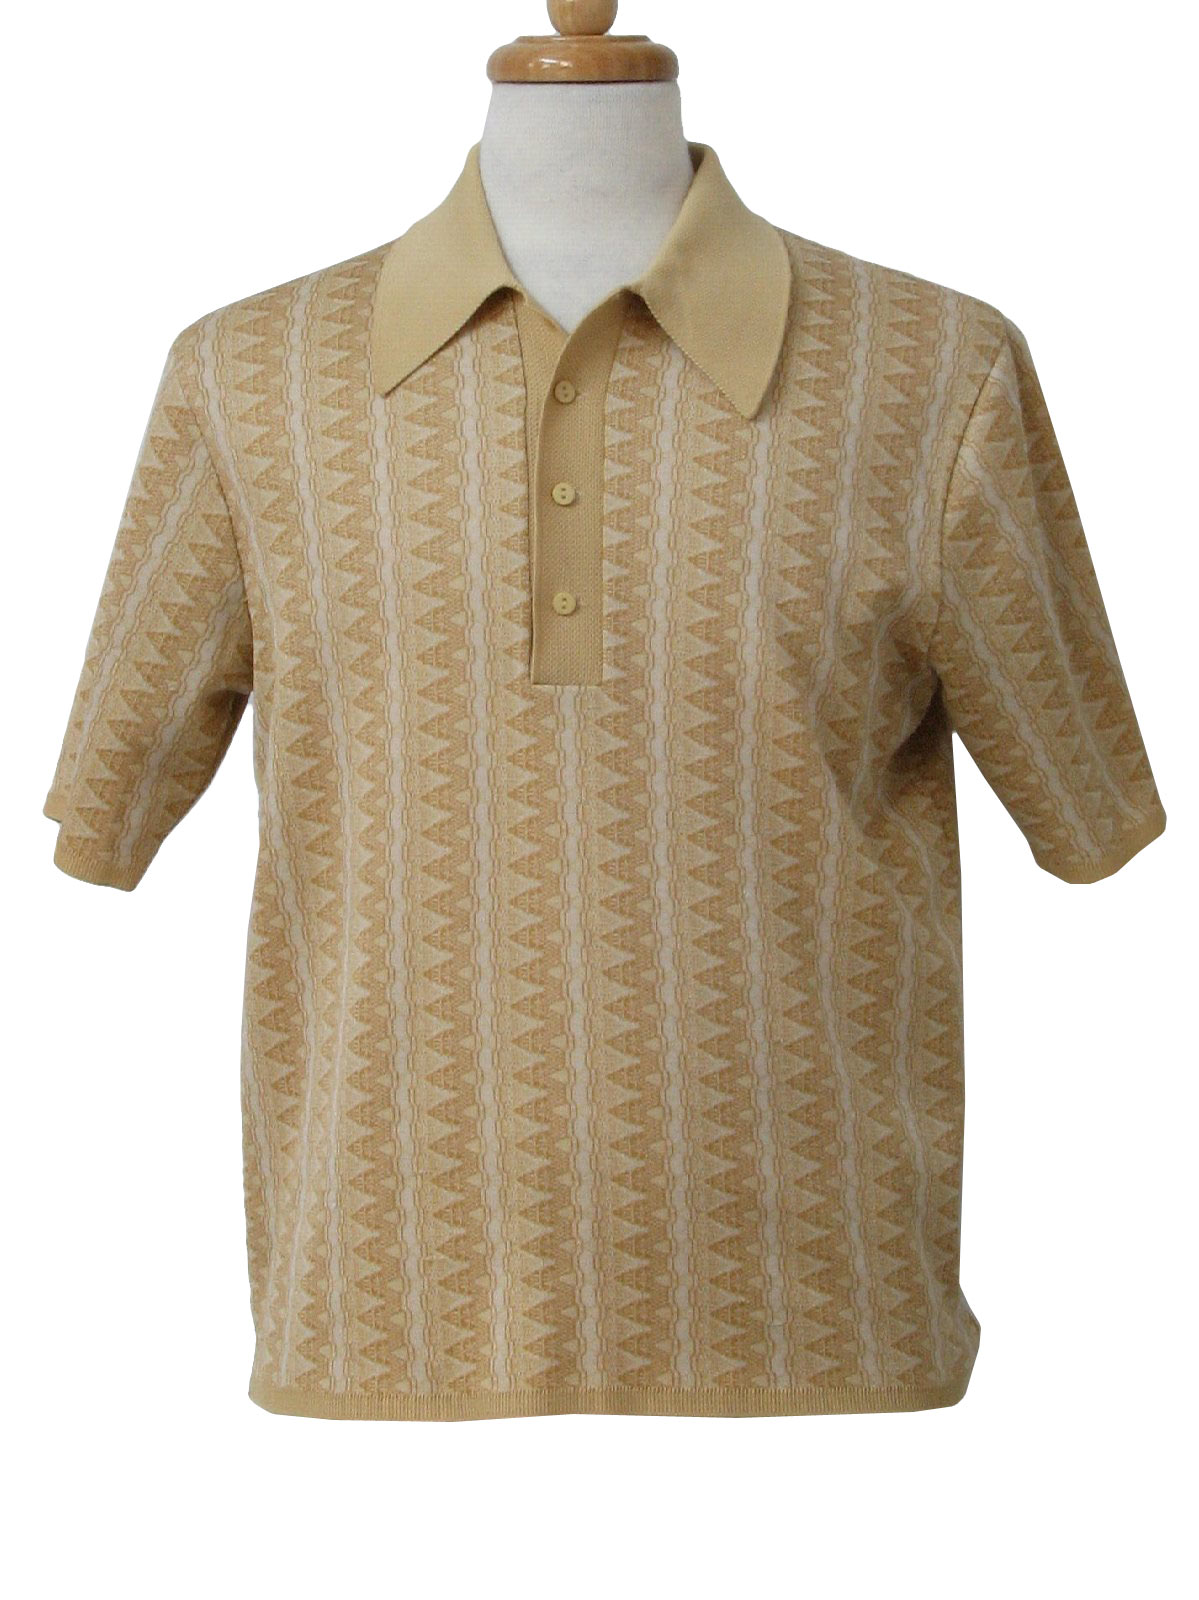 Vintage 70s Knit Shirt: 70s -Missing Label- Mens shaded tan and off